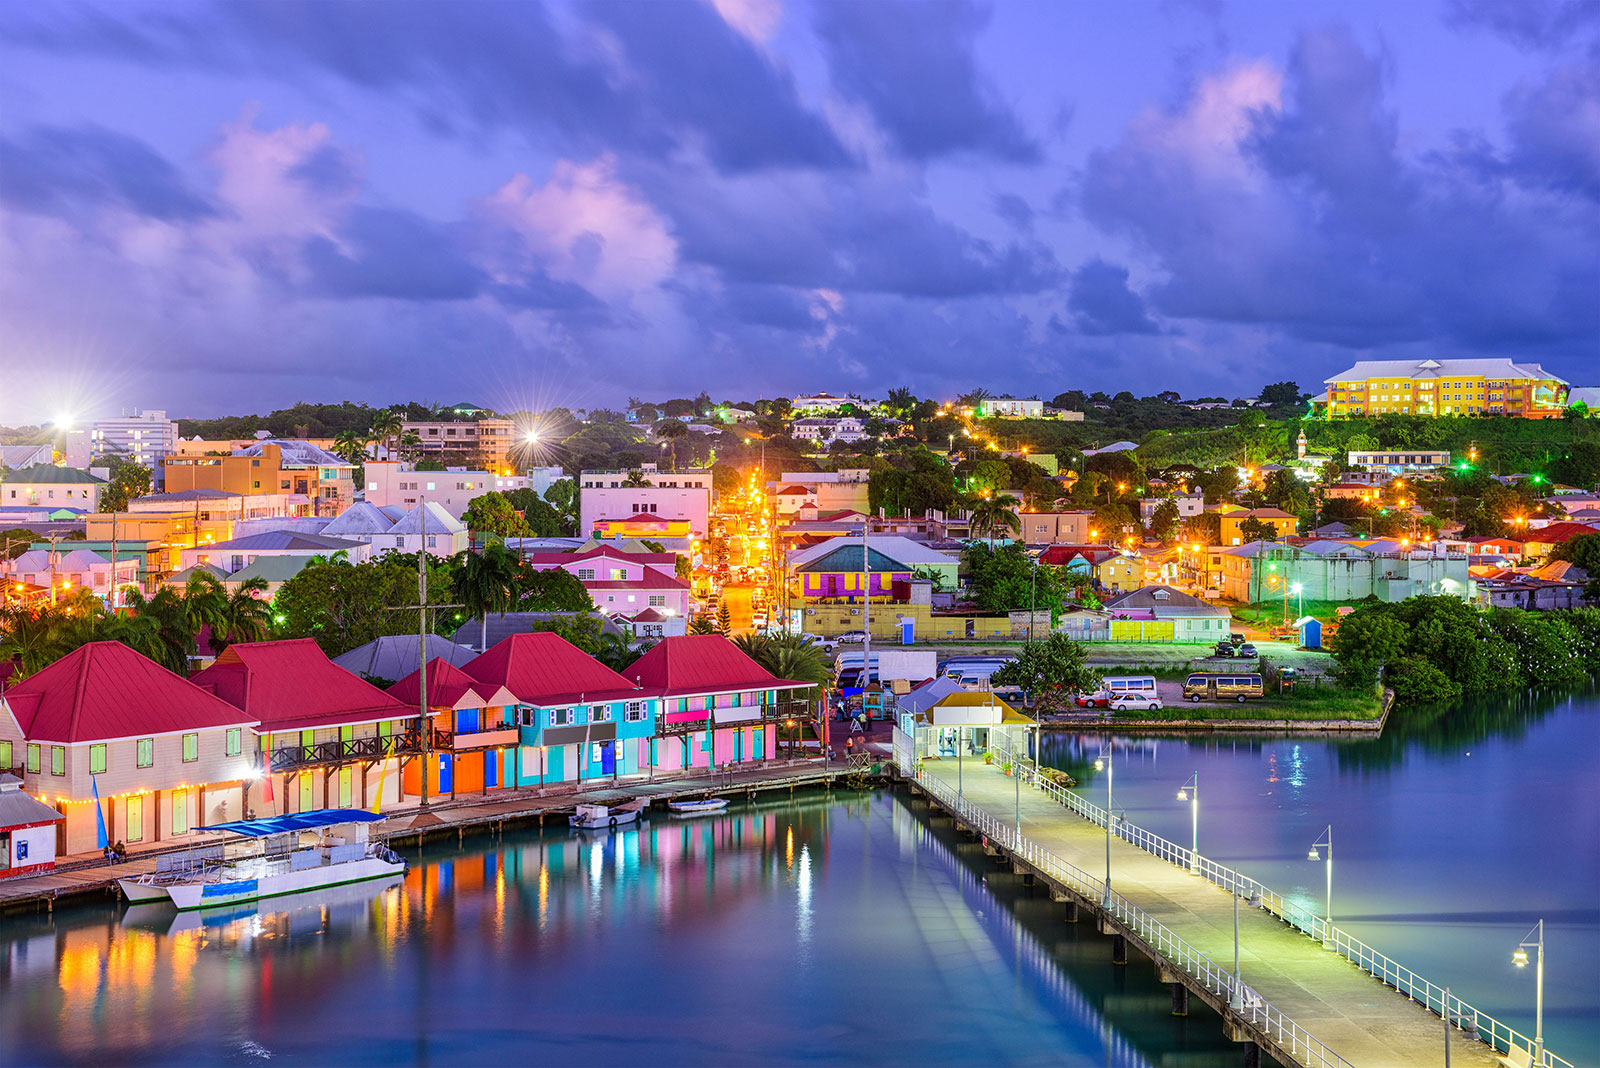 Your Random Knowledge Is Lacking If You Don’t Get 15/25 on This Quiz Antigua and Barbuda